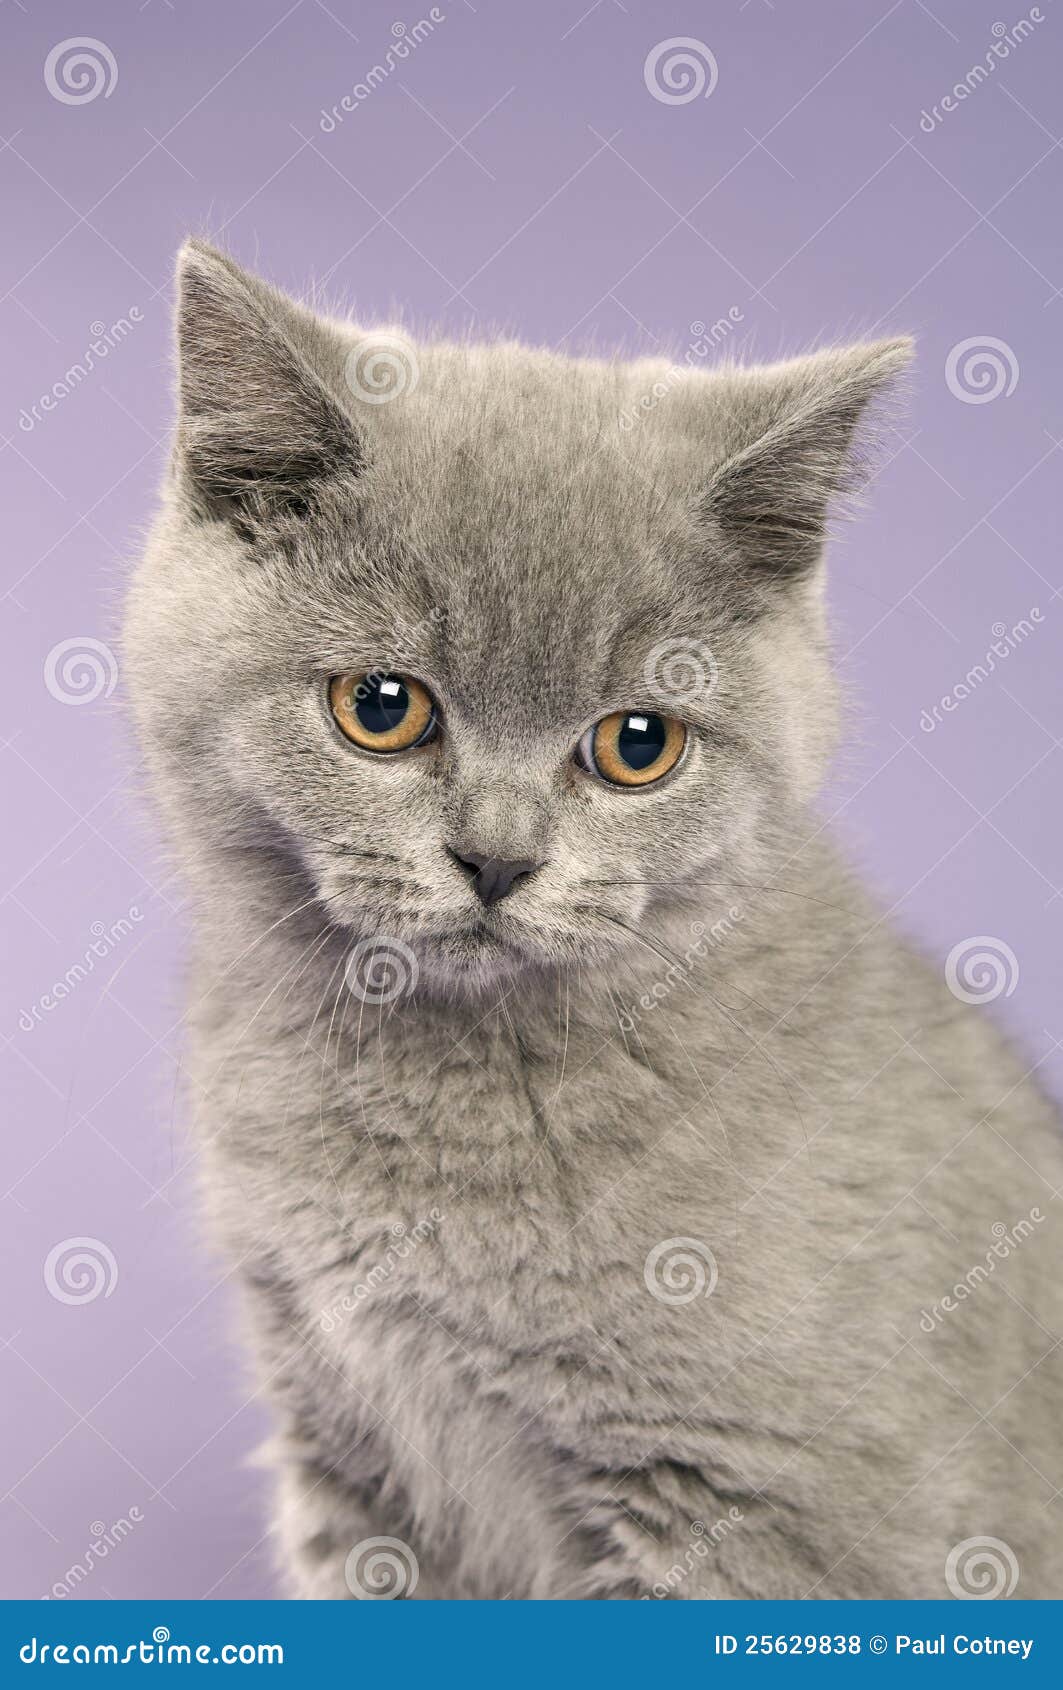 British short haired grey cat on a purple background